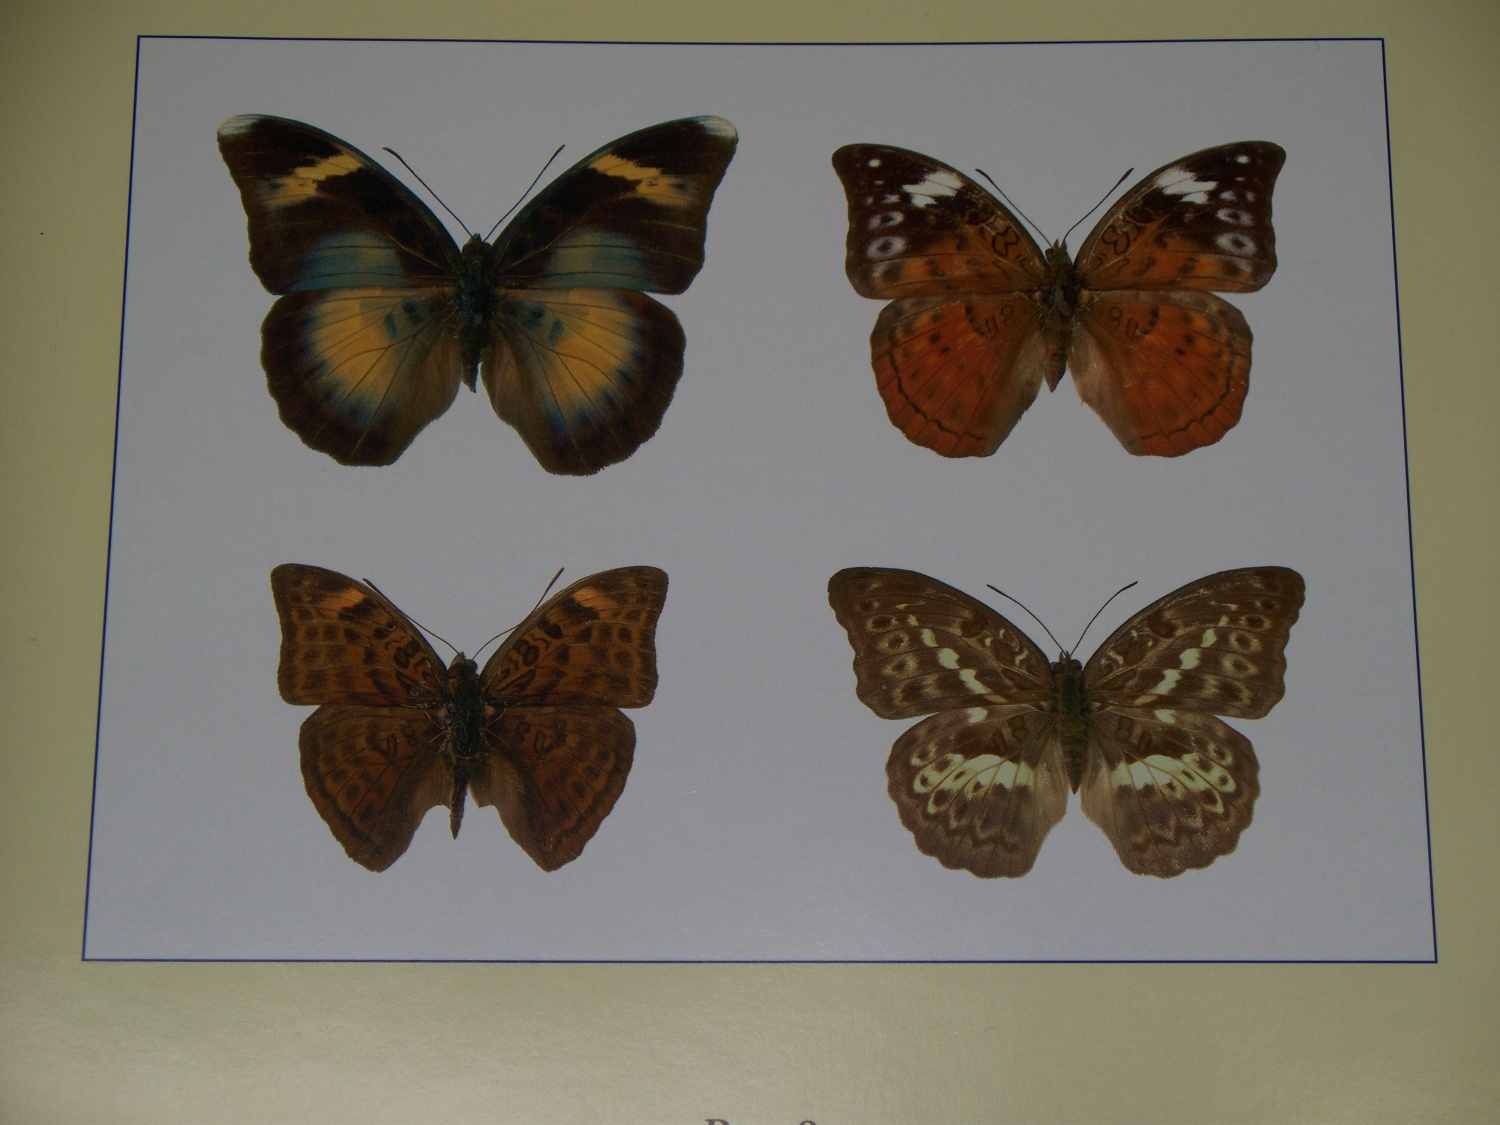 Butterflies of the world (Nymphalidae IV)